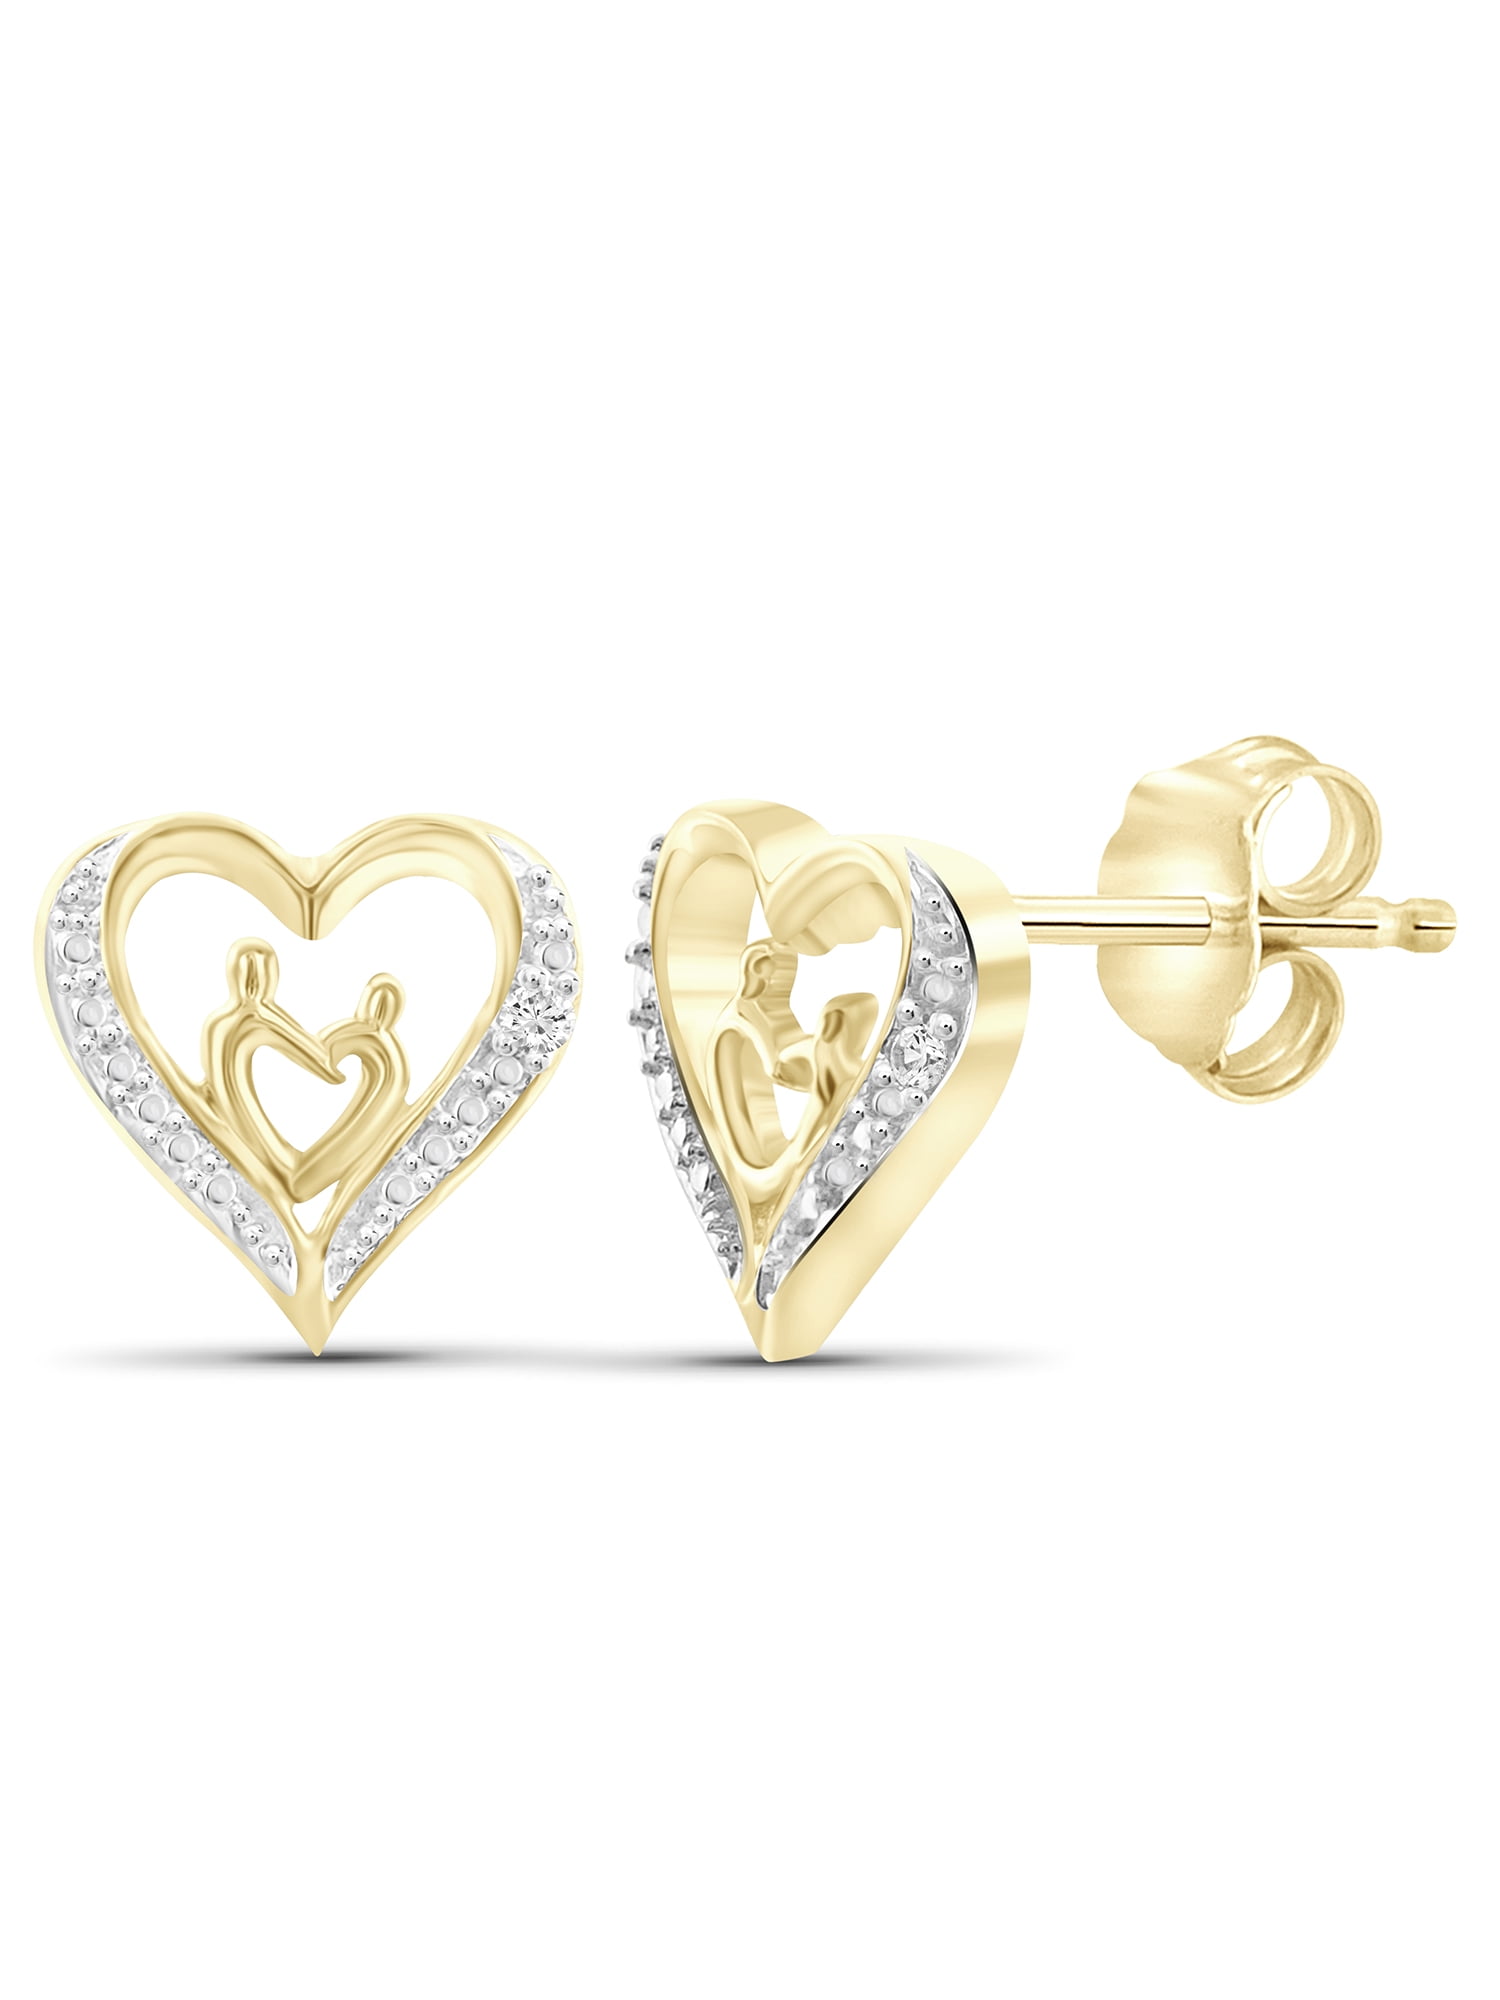 Two-Tone Tiny Heart Earrings In 14K Yellow and Rose Gold Baby Earrings 